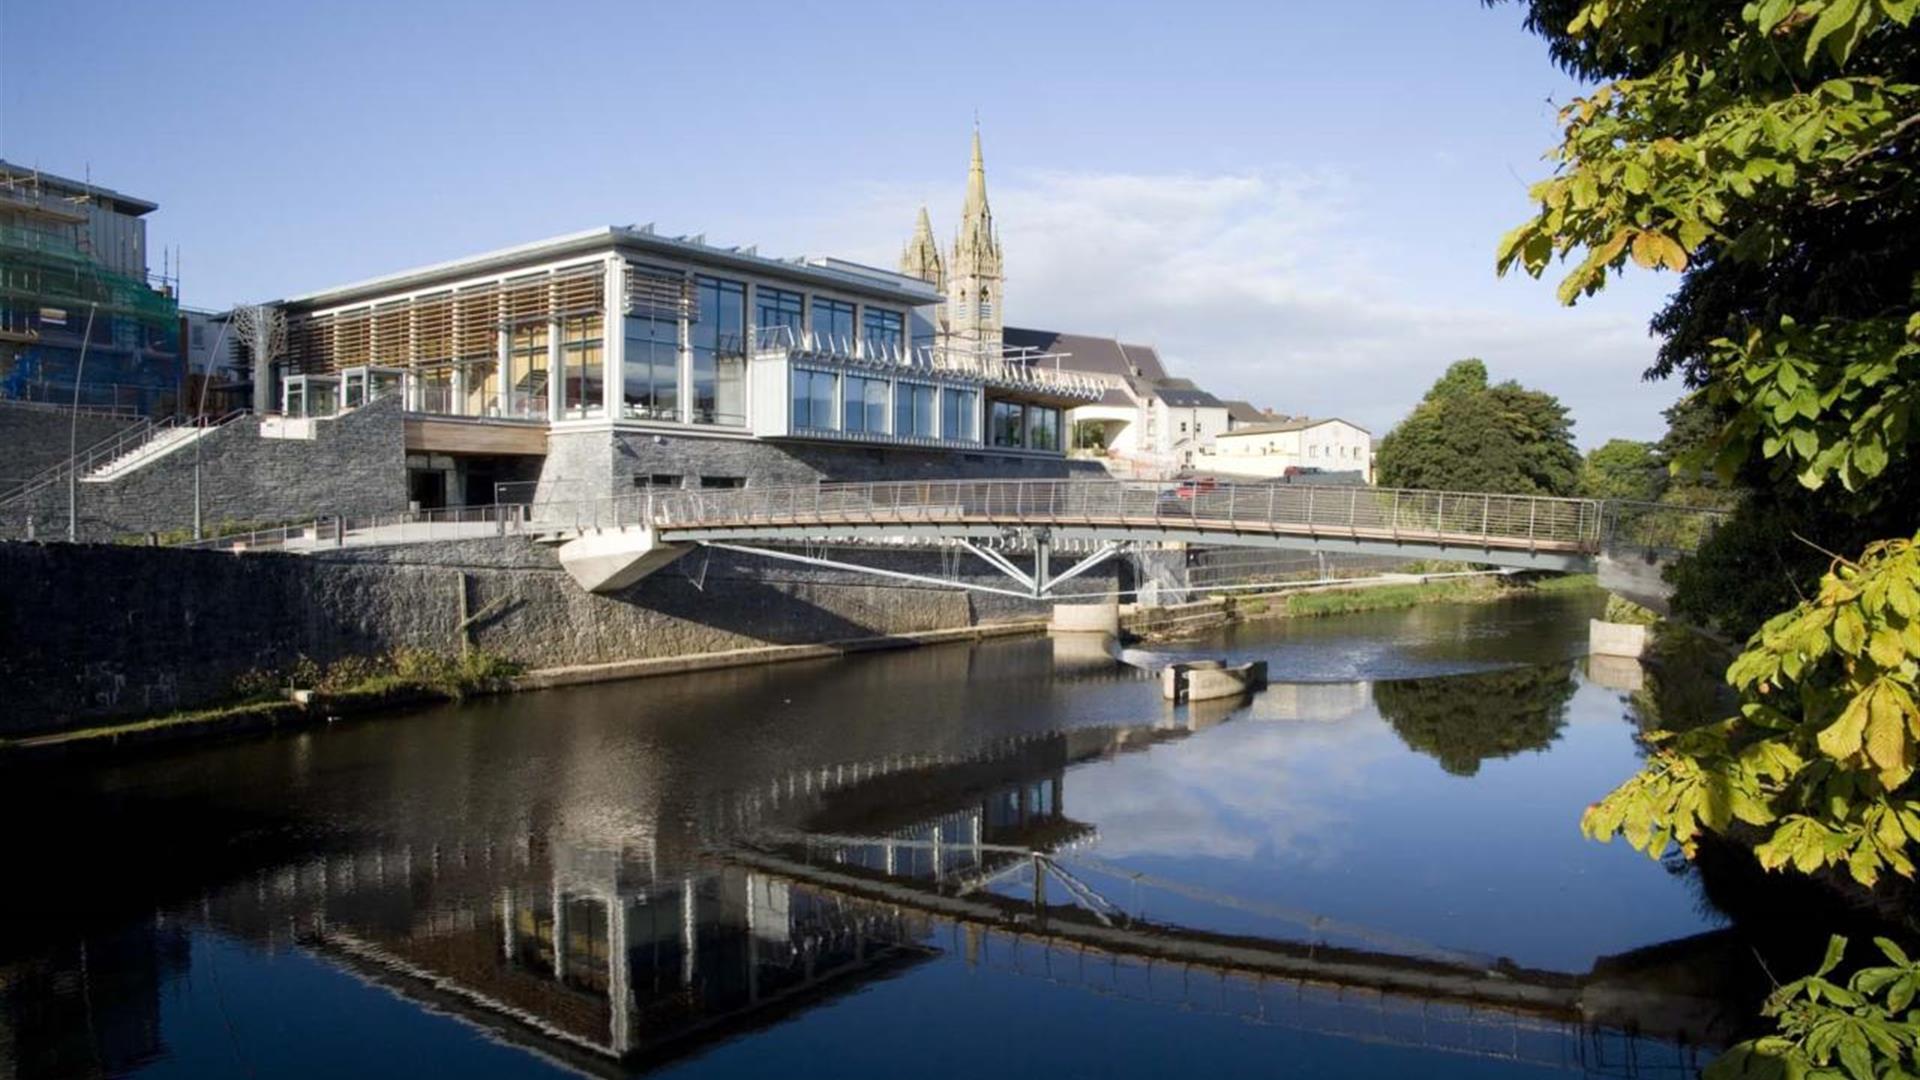 Omagh Visitor Information Centre